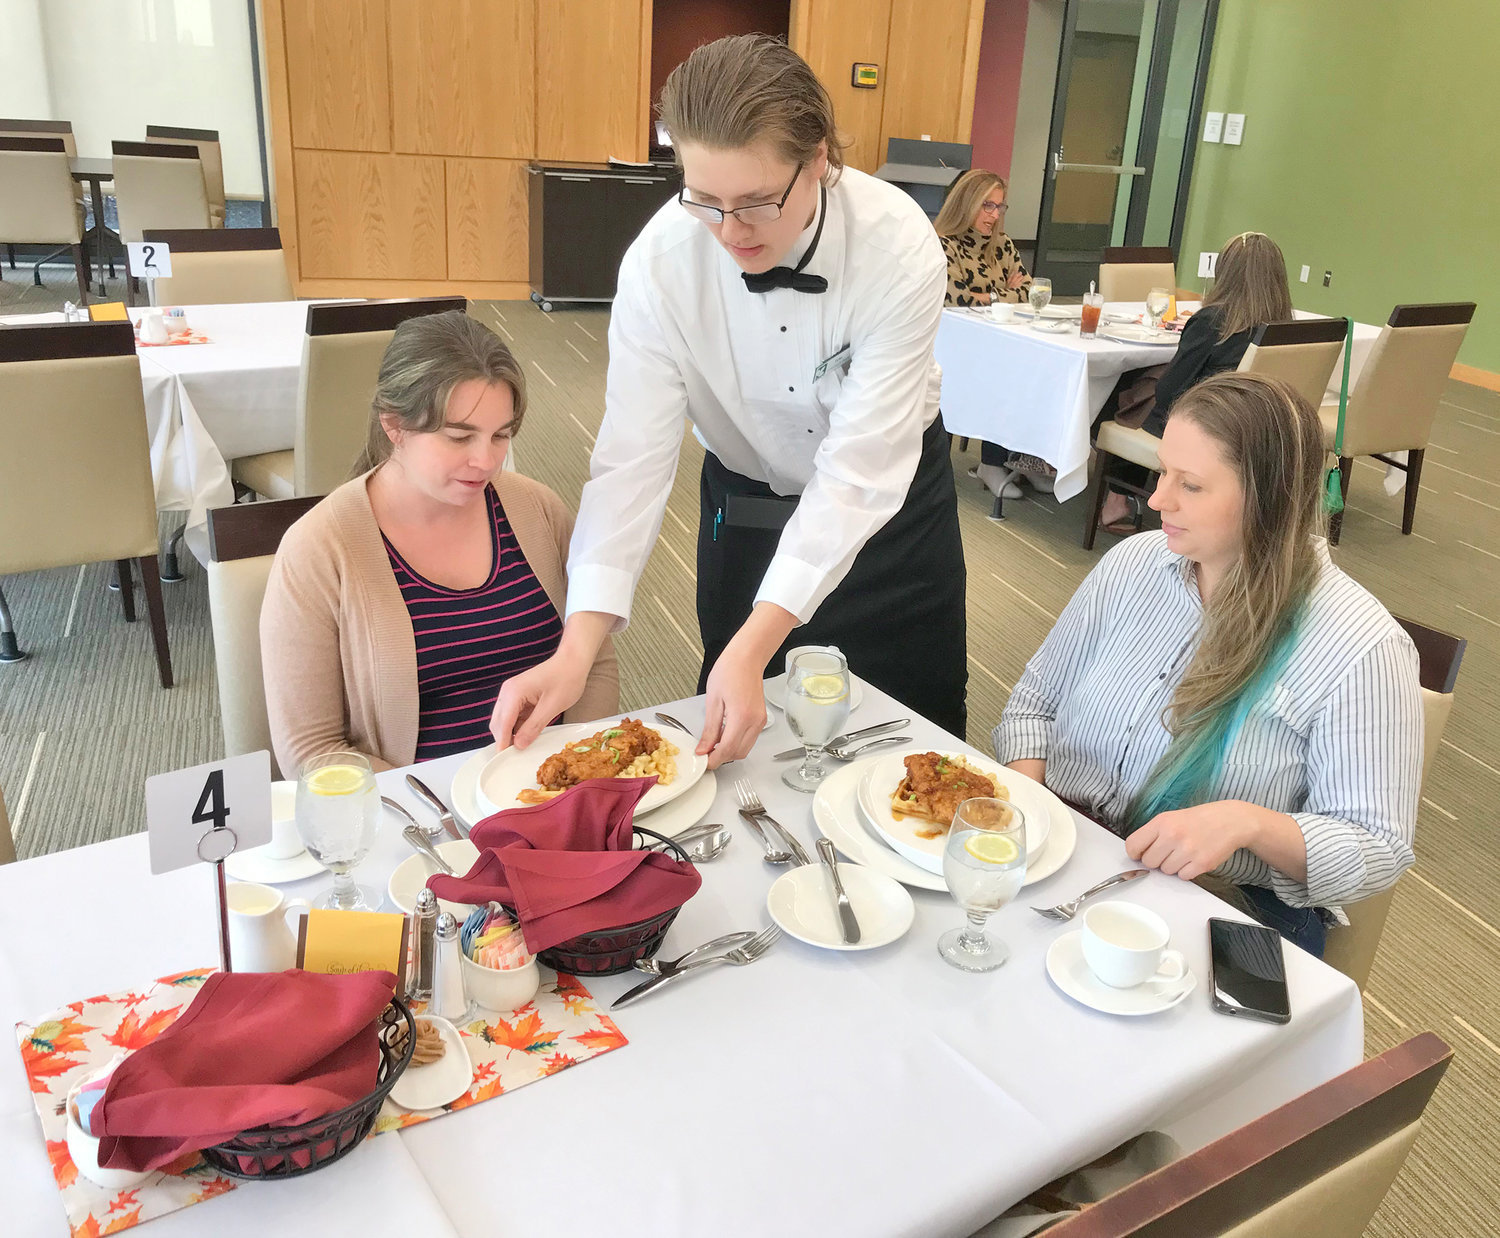 Mohawk Valley Community College culinary arts management student Tyler Hall, standing, serves Katie Voce, left, and Candice Docherty in October 2022 at the Dining and Community Hall on the Rome campus.